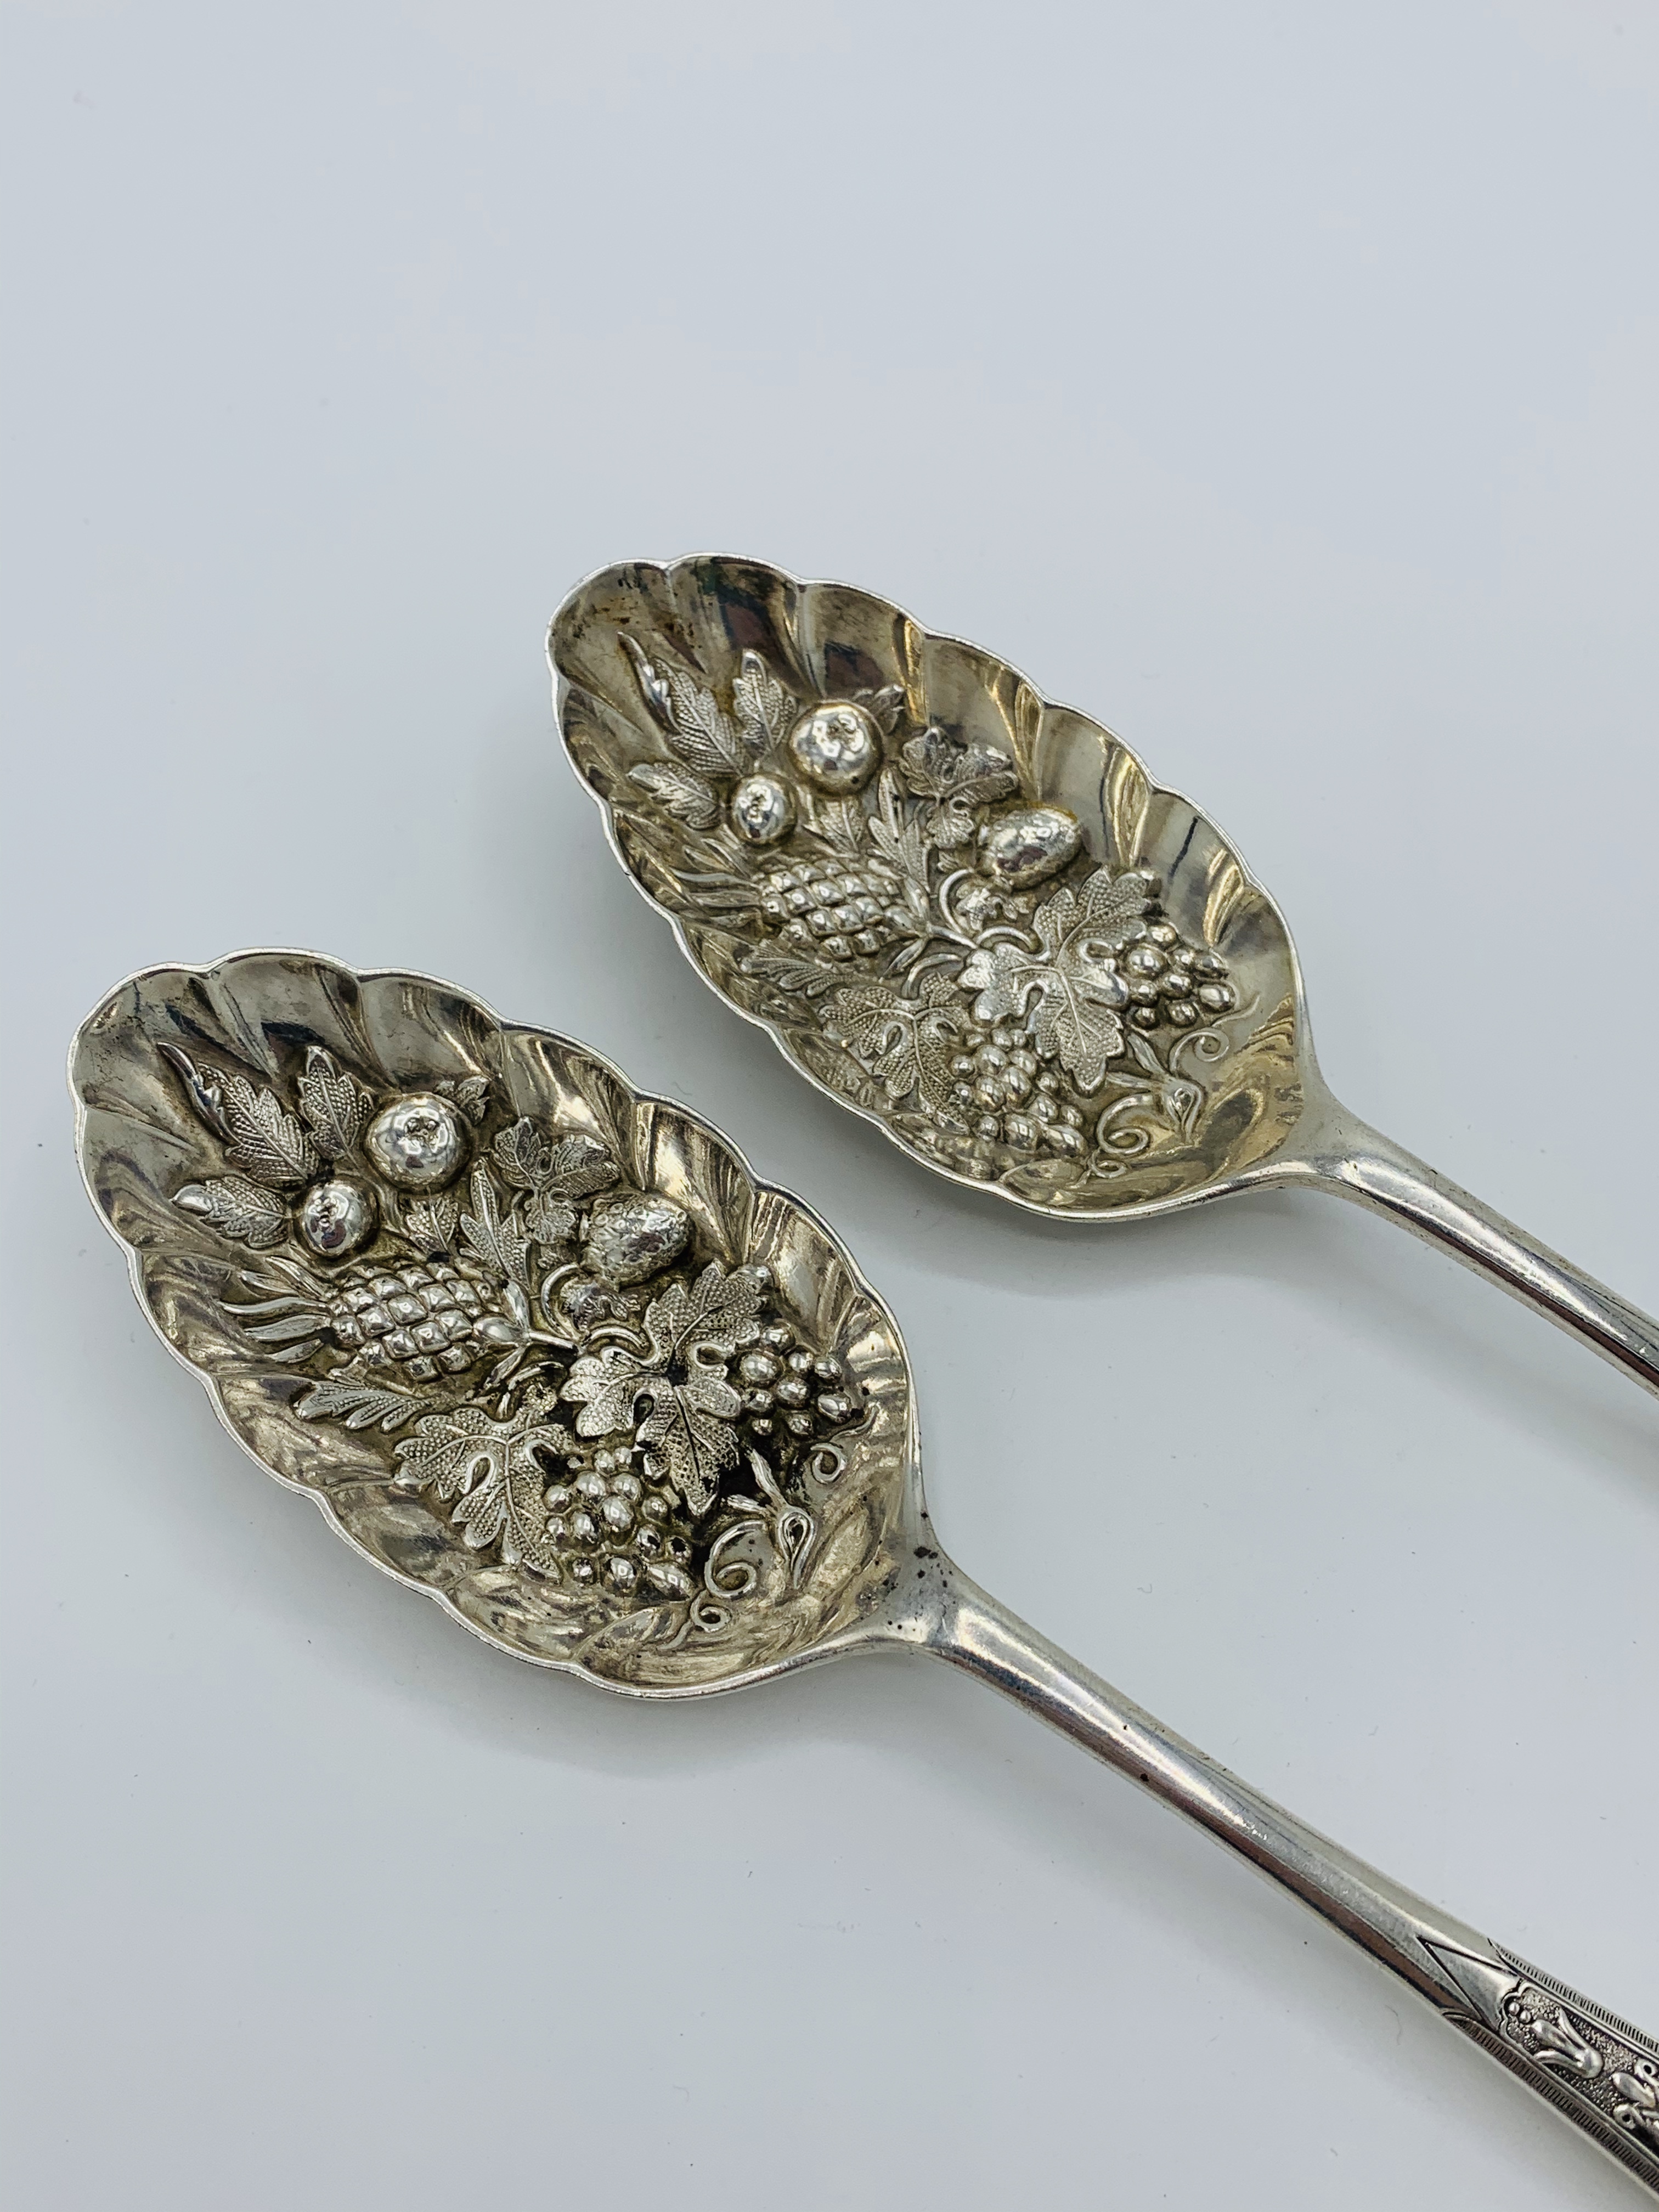 2 silver berry spoons by Walker & Hall. - Image 2 of 3